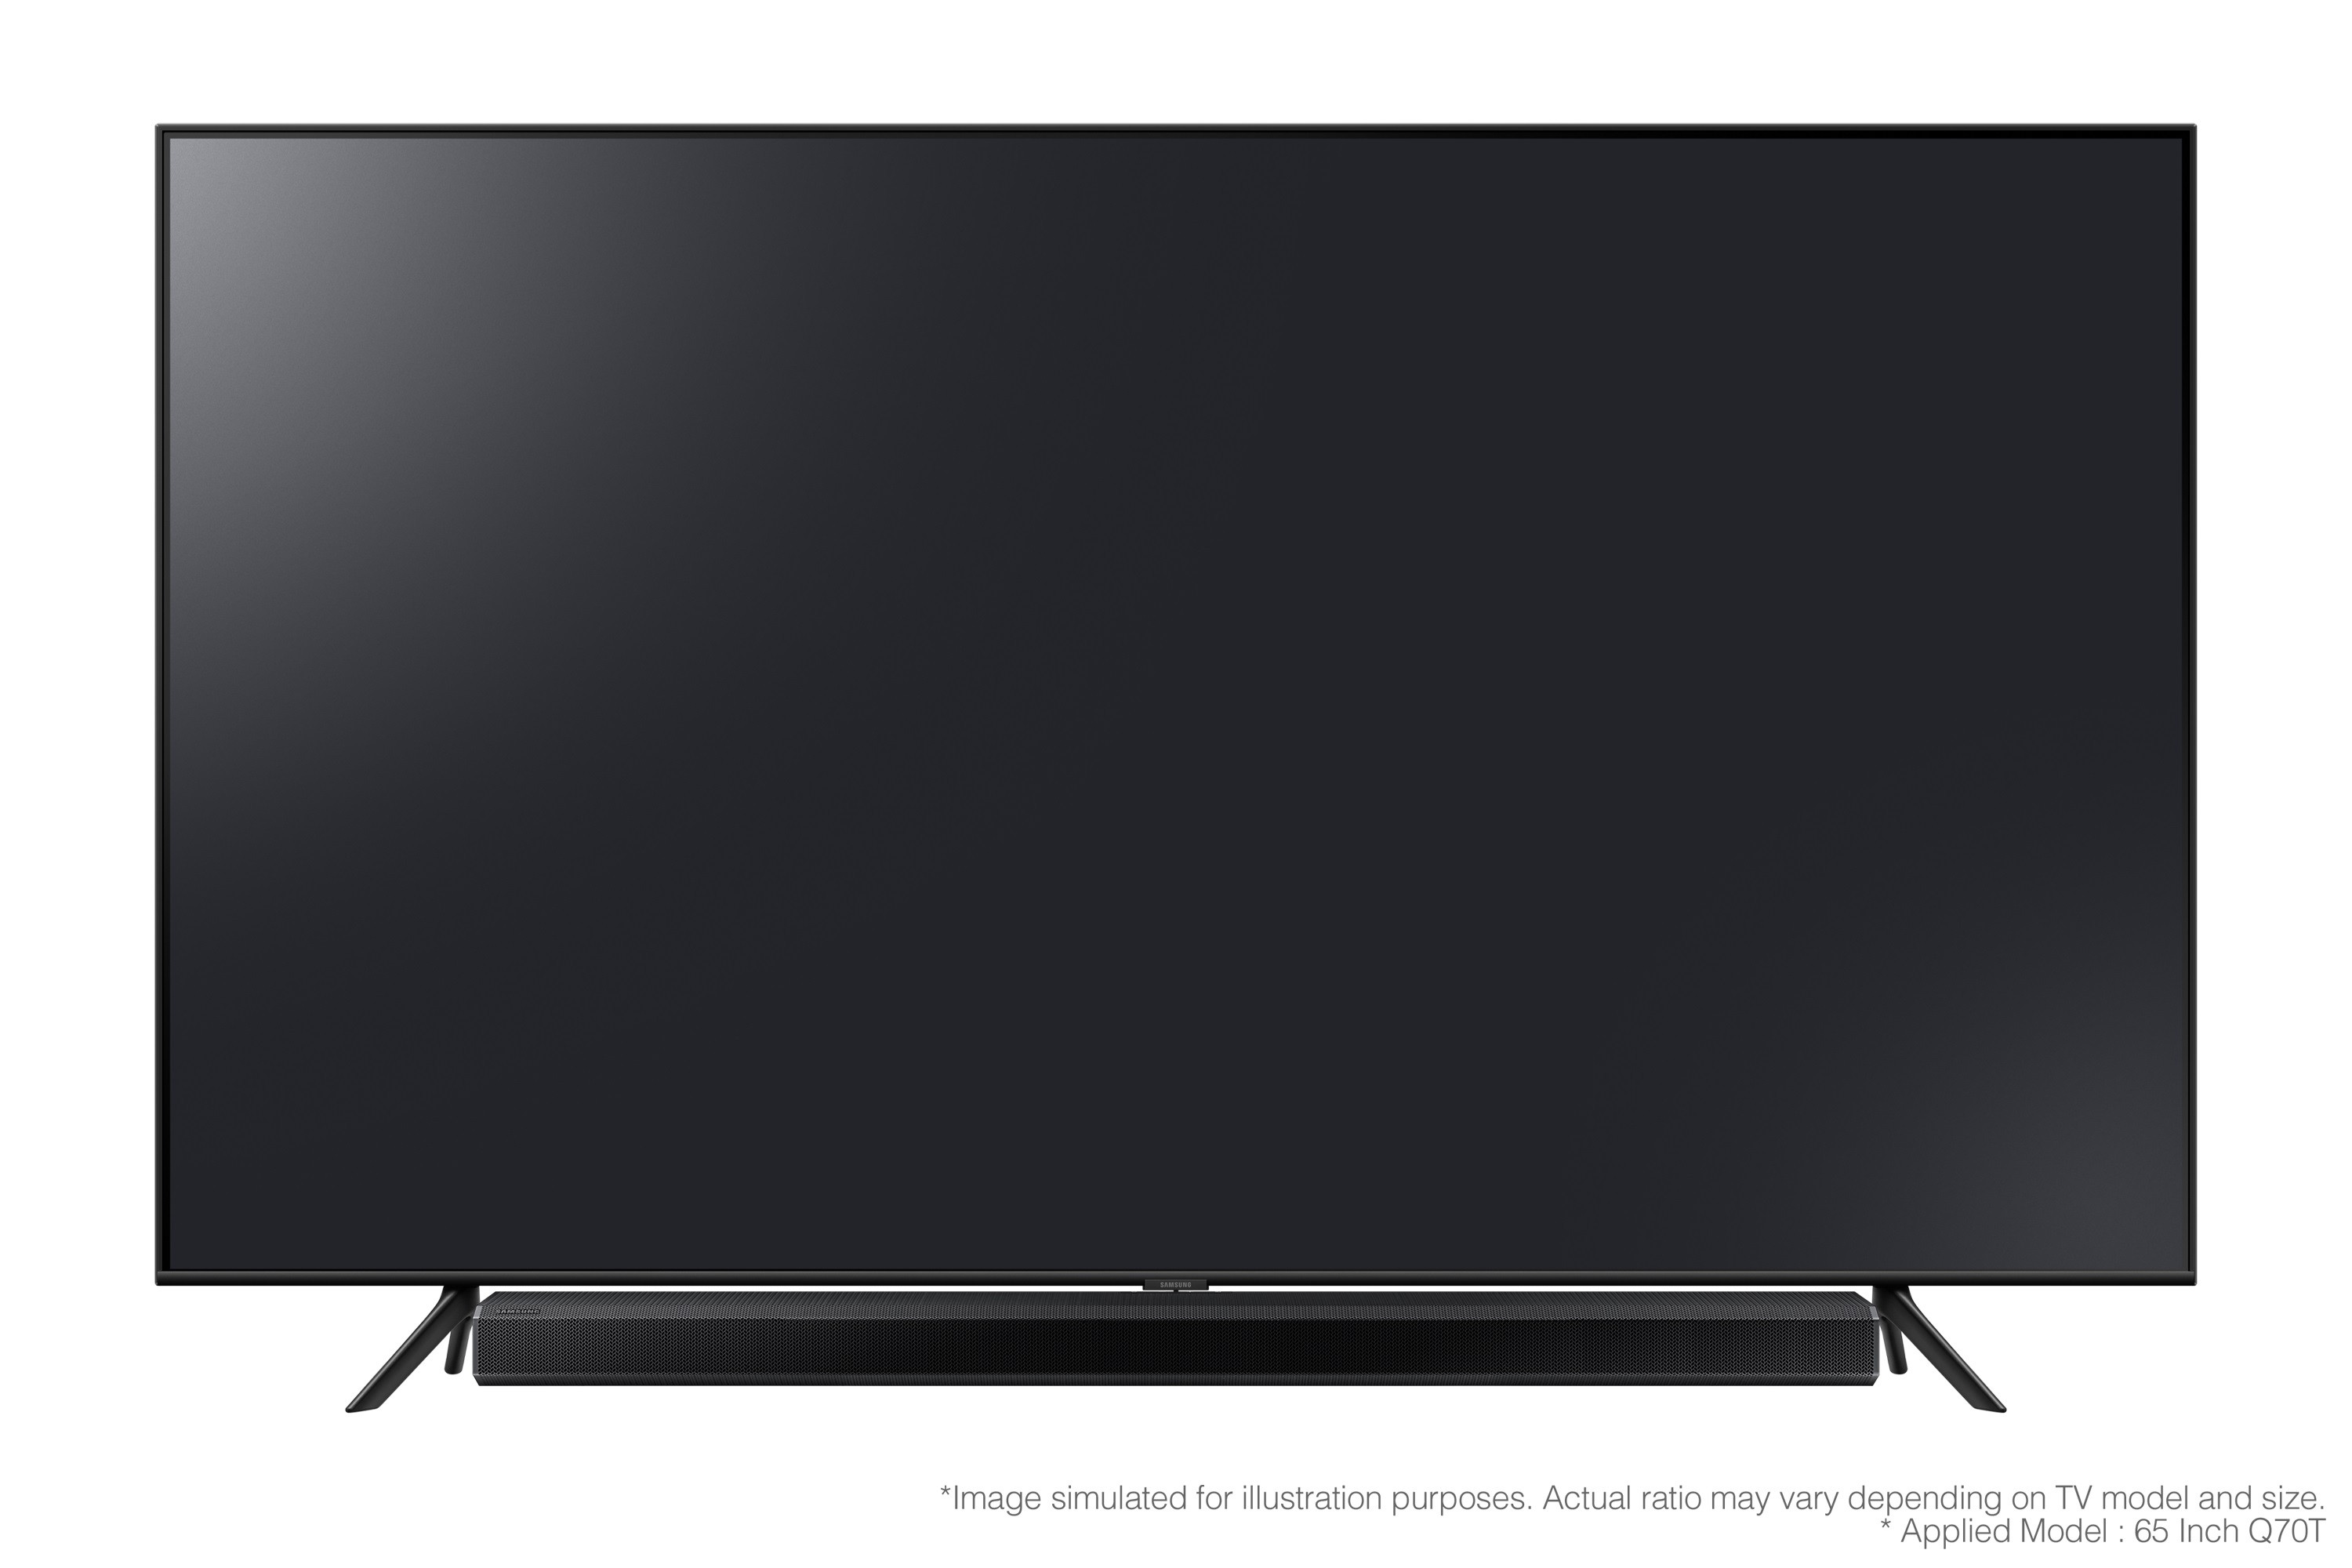 Disgust Without Get used to Soundbar Samsung HW-Q70T, 3.1.2 Ch, 330 W, Wi-Fi, Bluetooth, Dolby Atmos,  Acoustic Beam, DTS:X, Black